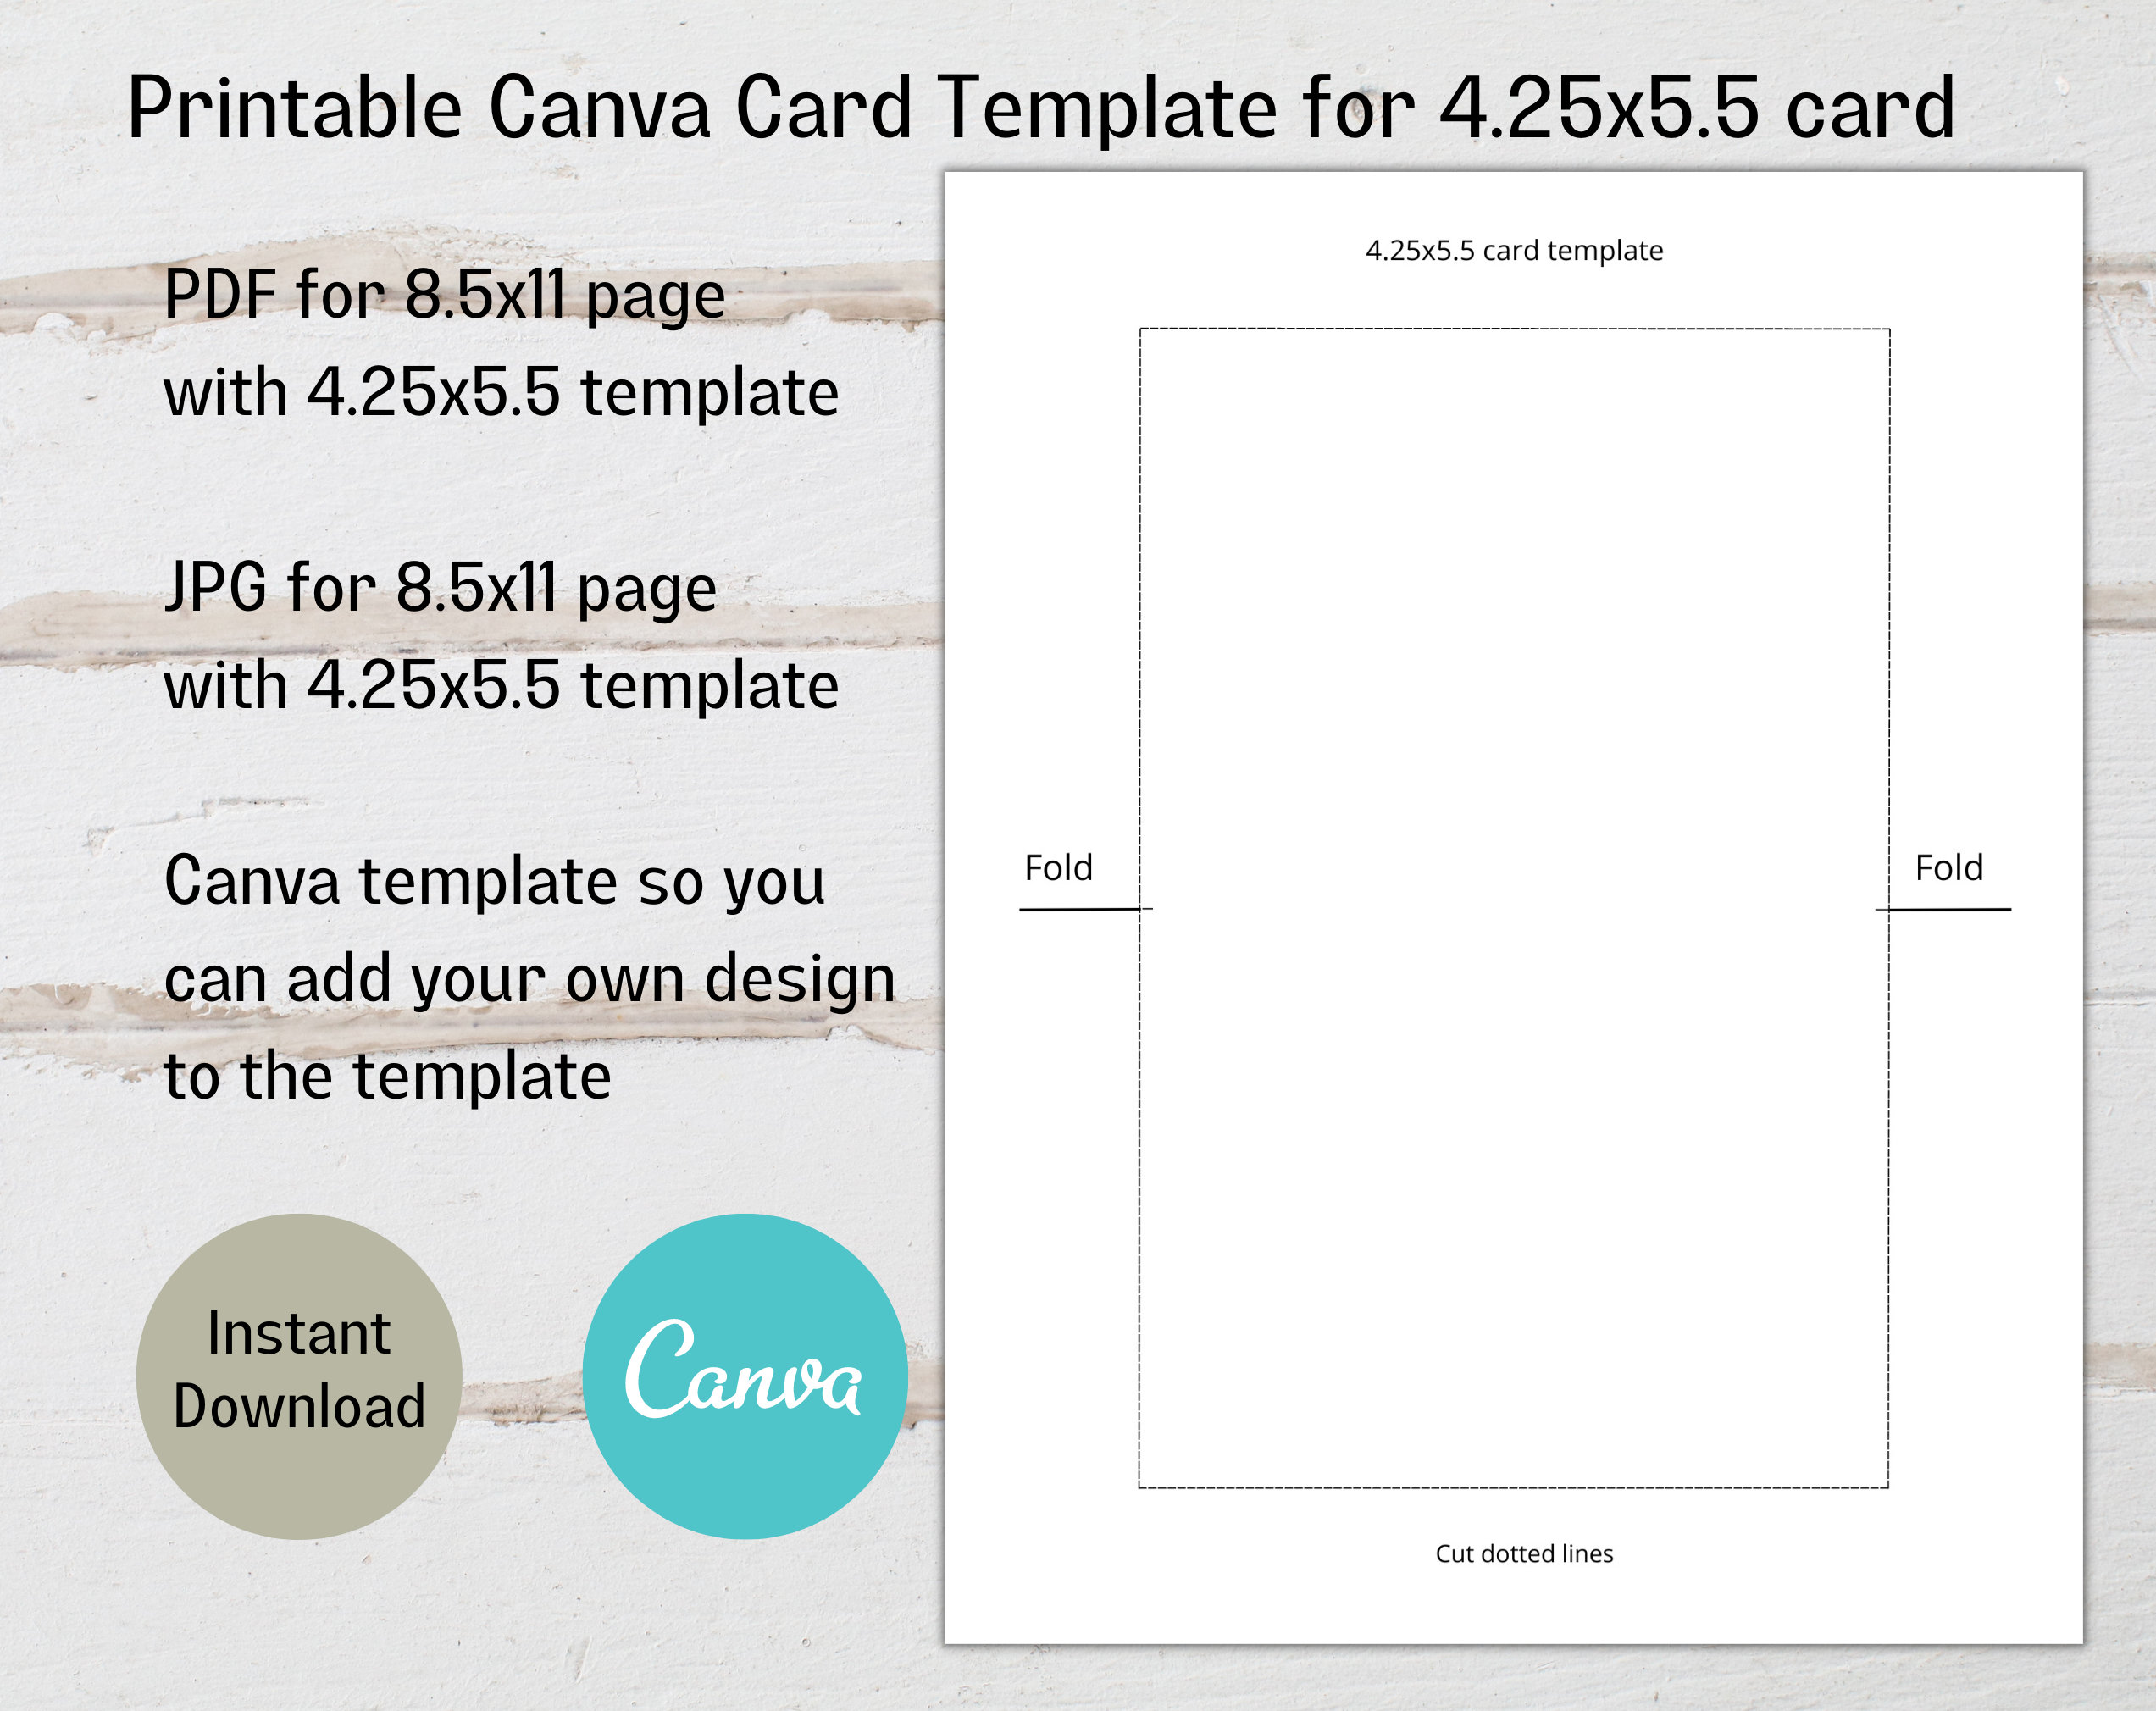 Printable Canva Template for 4.25x5.5 Cards, Post Card Template, DIY ...